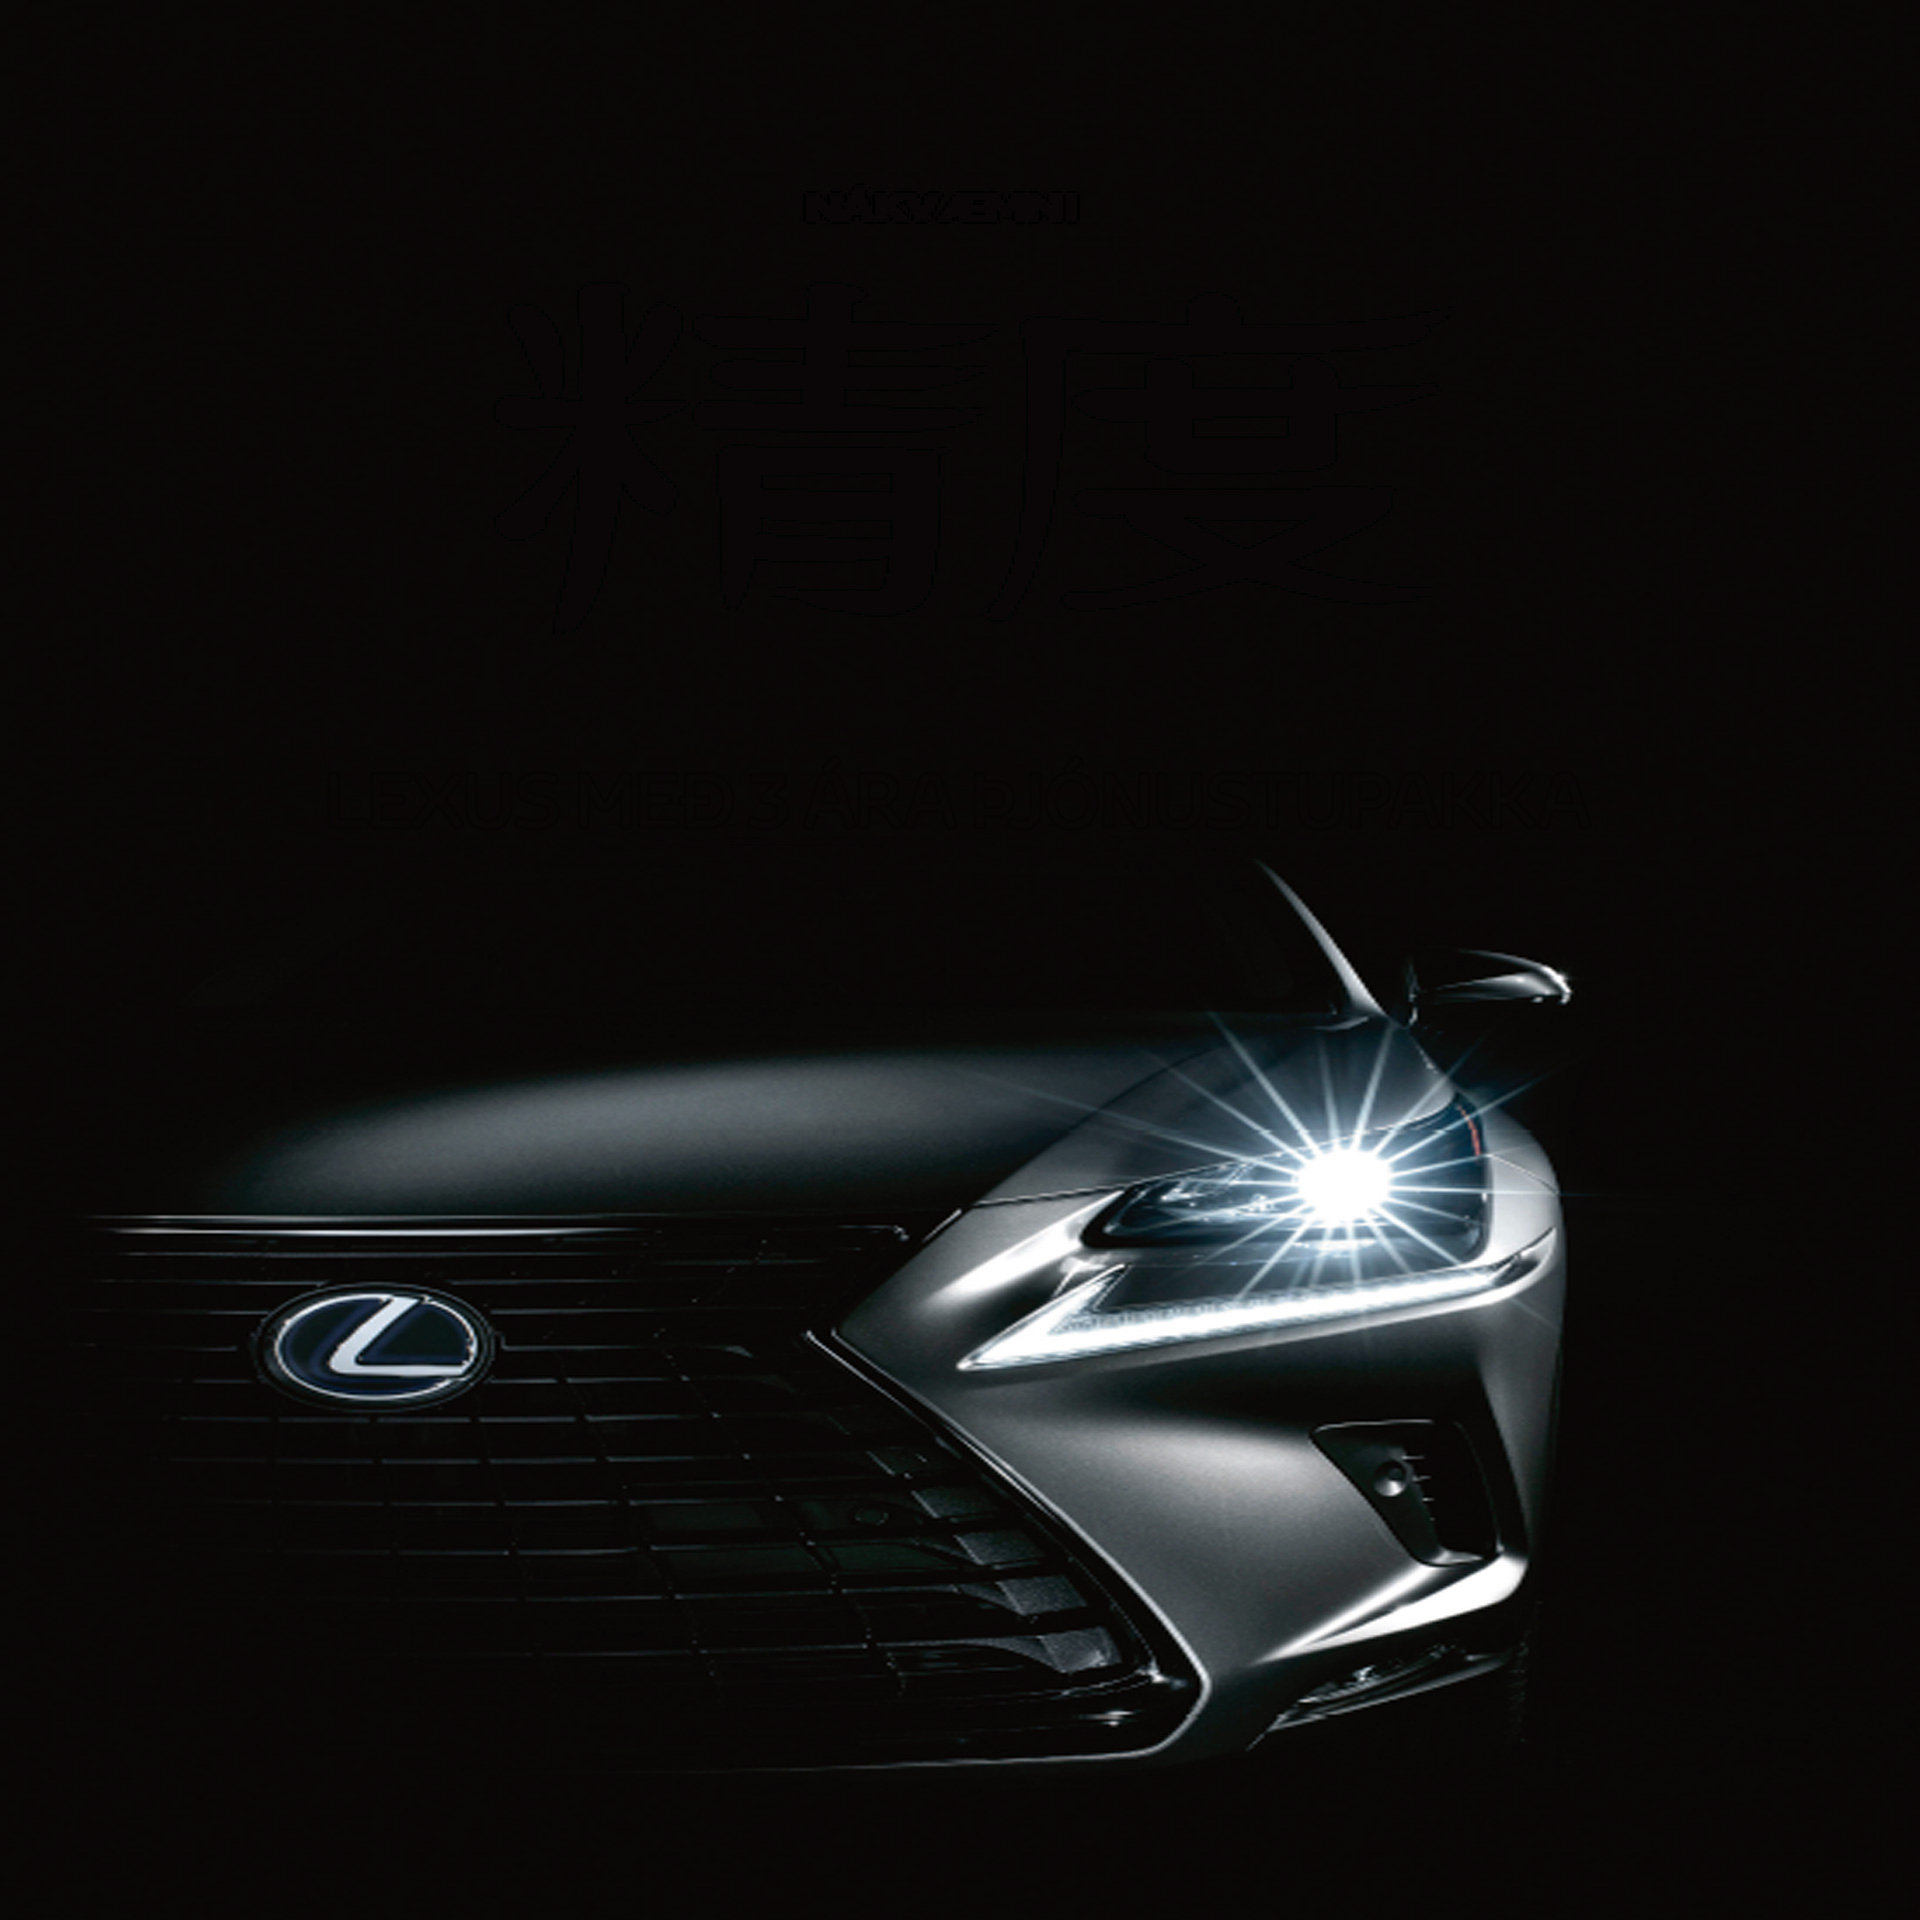 The Lexus spindle grille